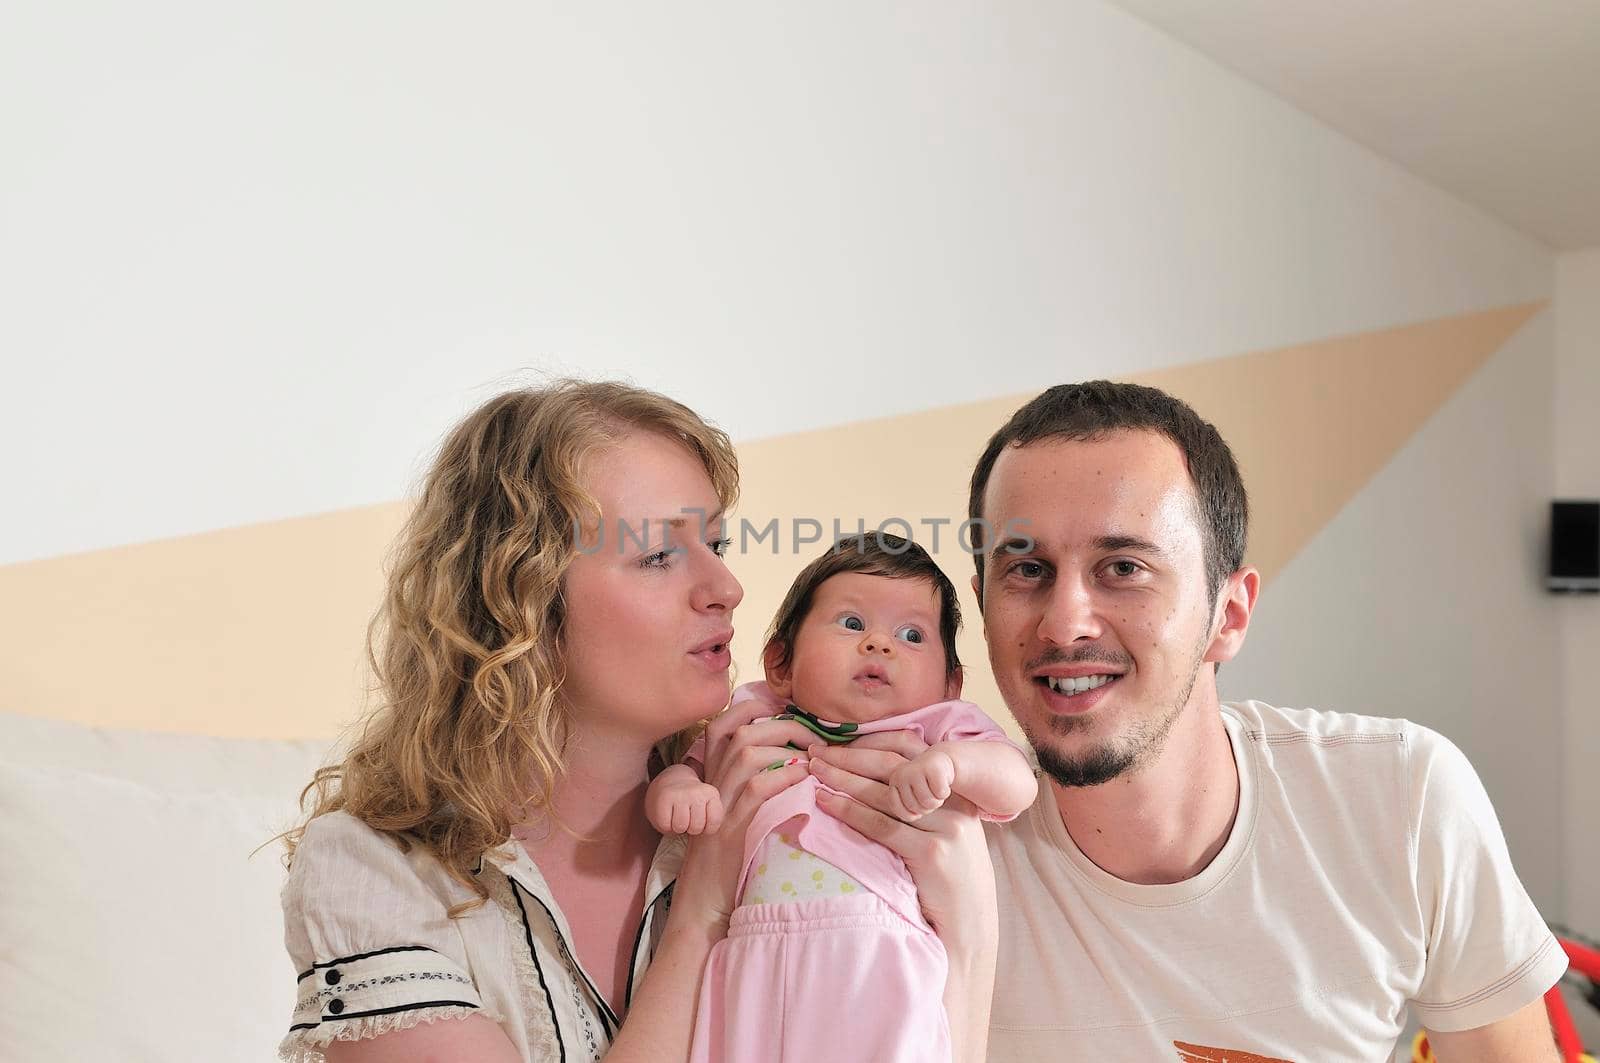 indoor portrait with happy young family and  cute little babby